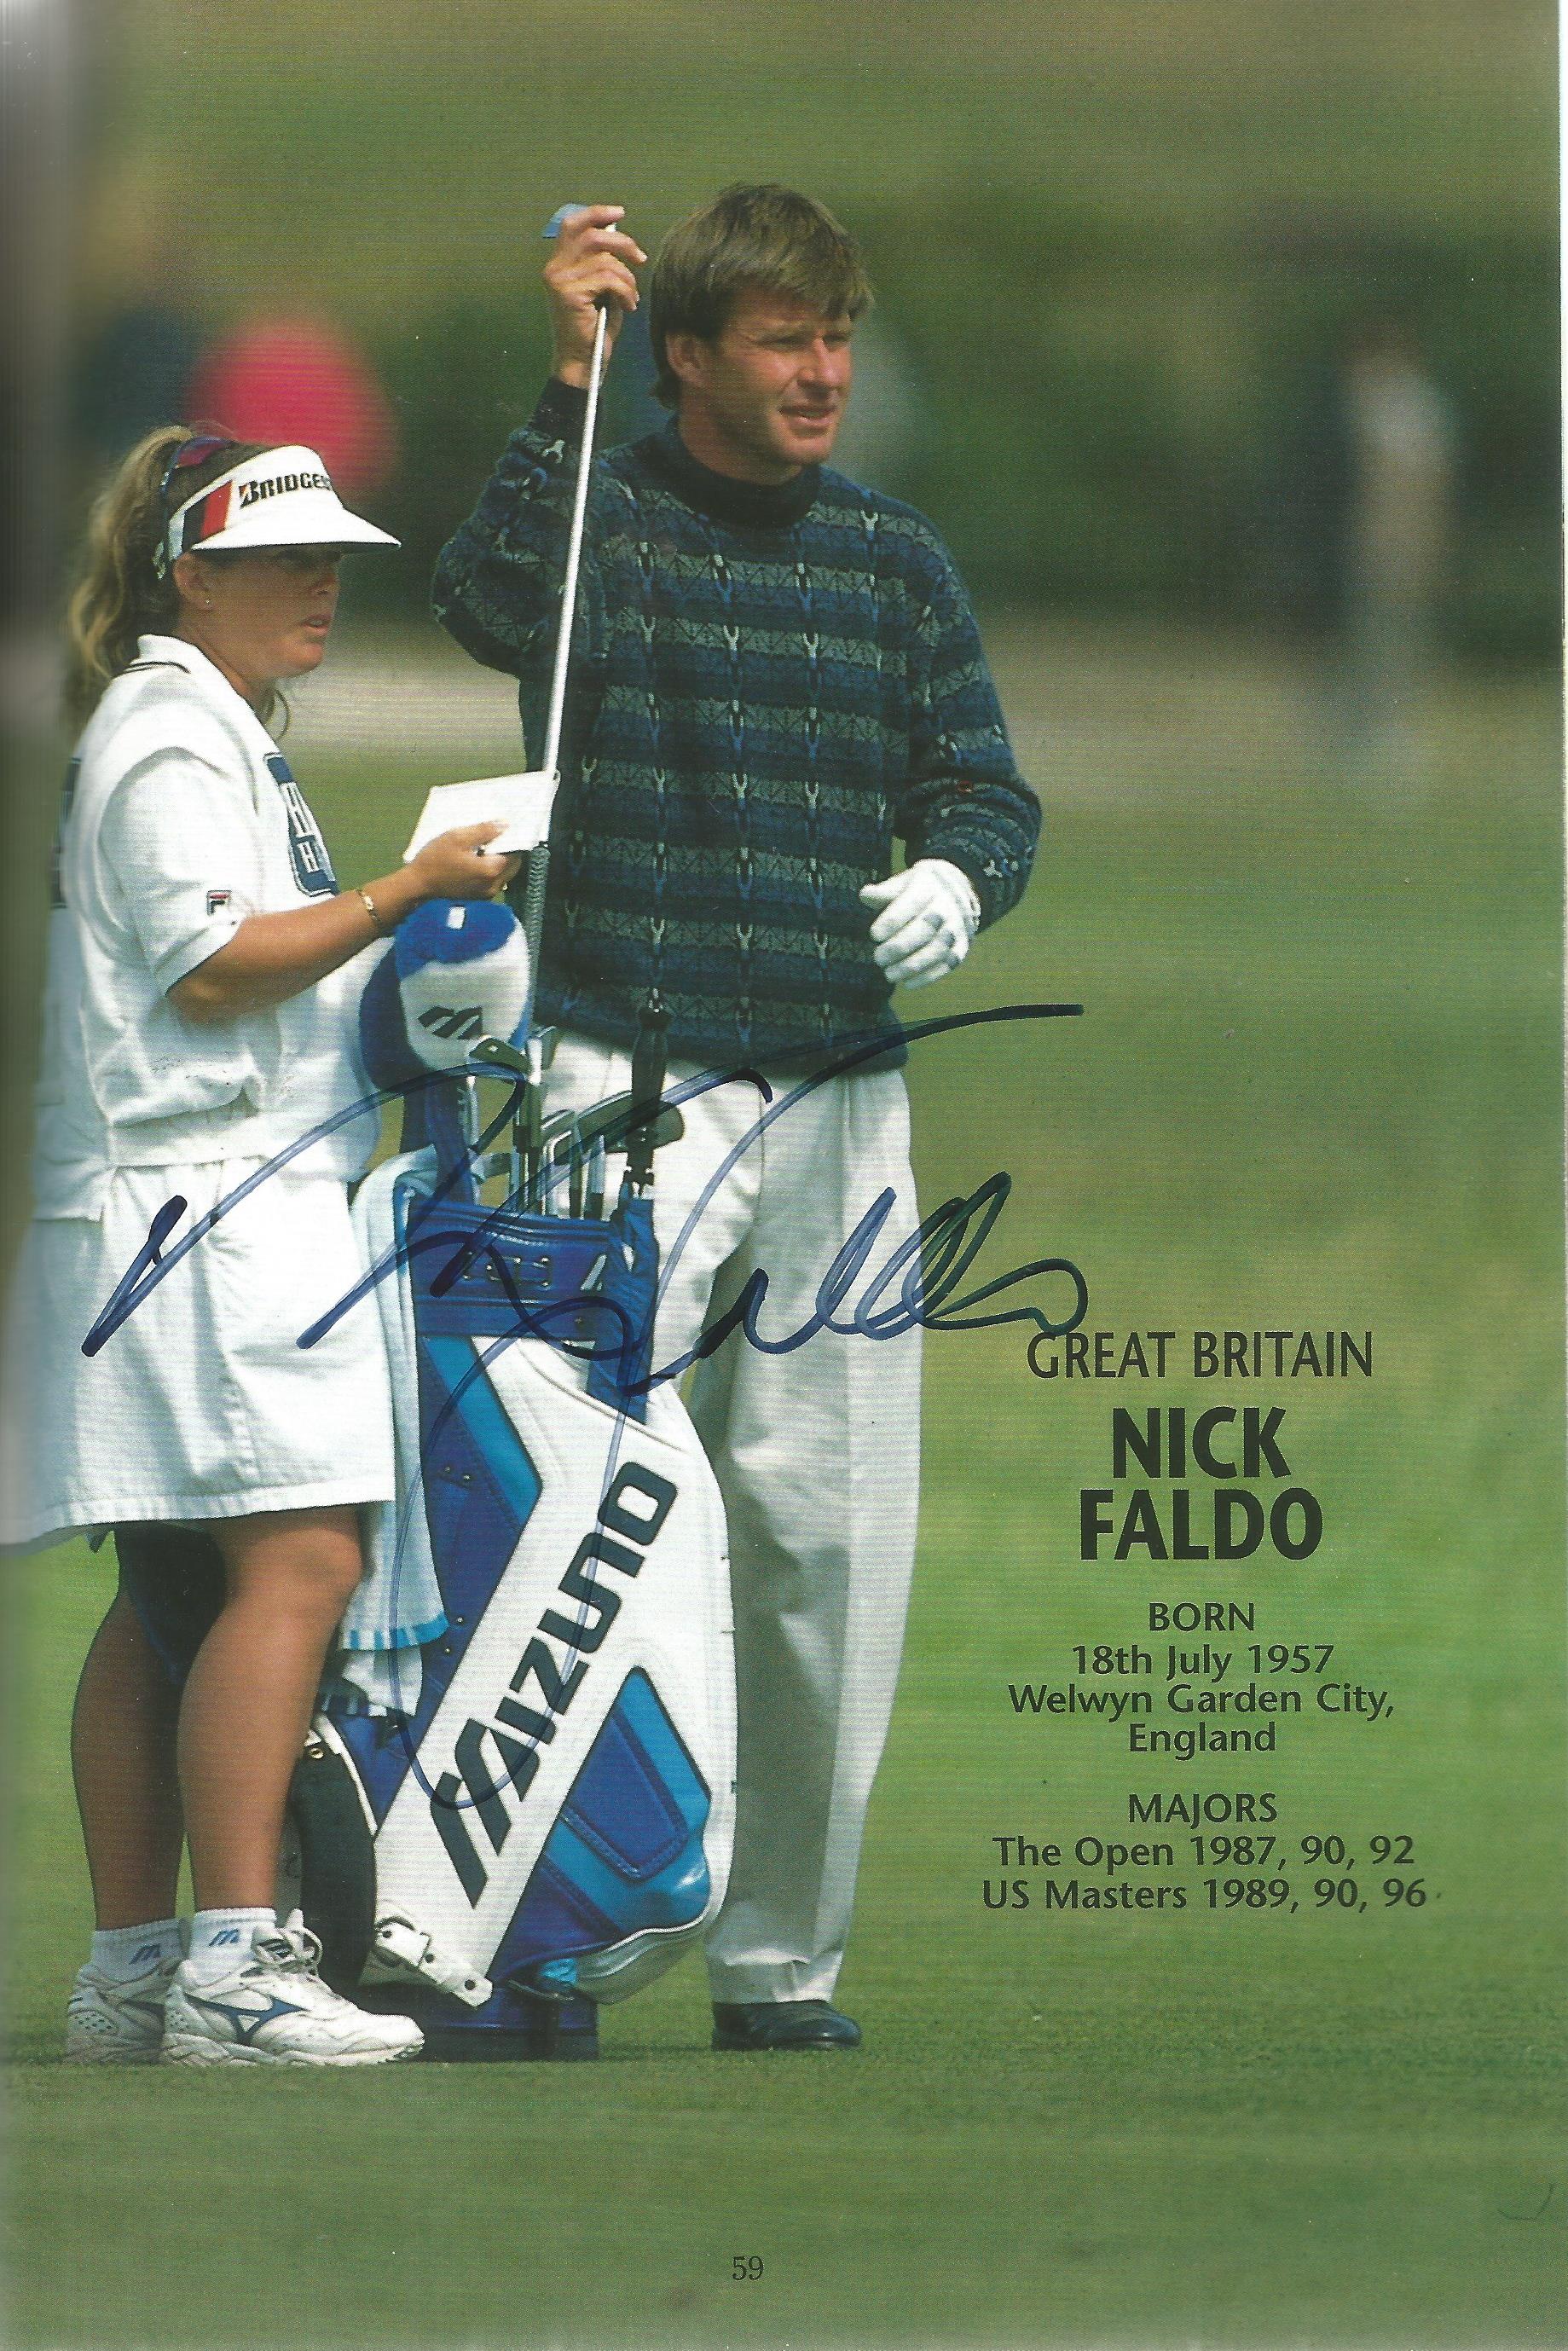 Jack Nicklaus golf legend signed on his picture page of 1996 Open Golf Championship programme - Image 3 of 5